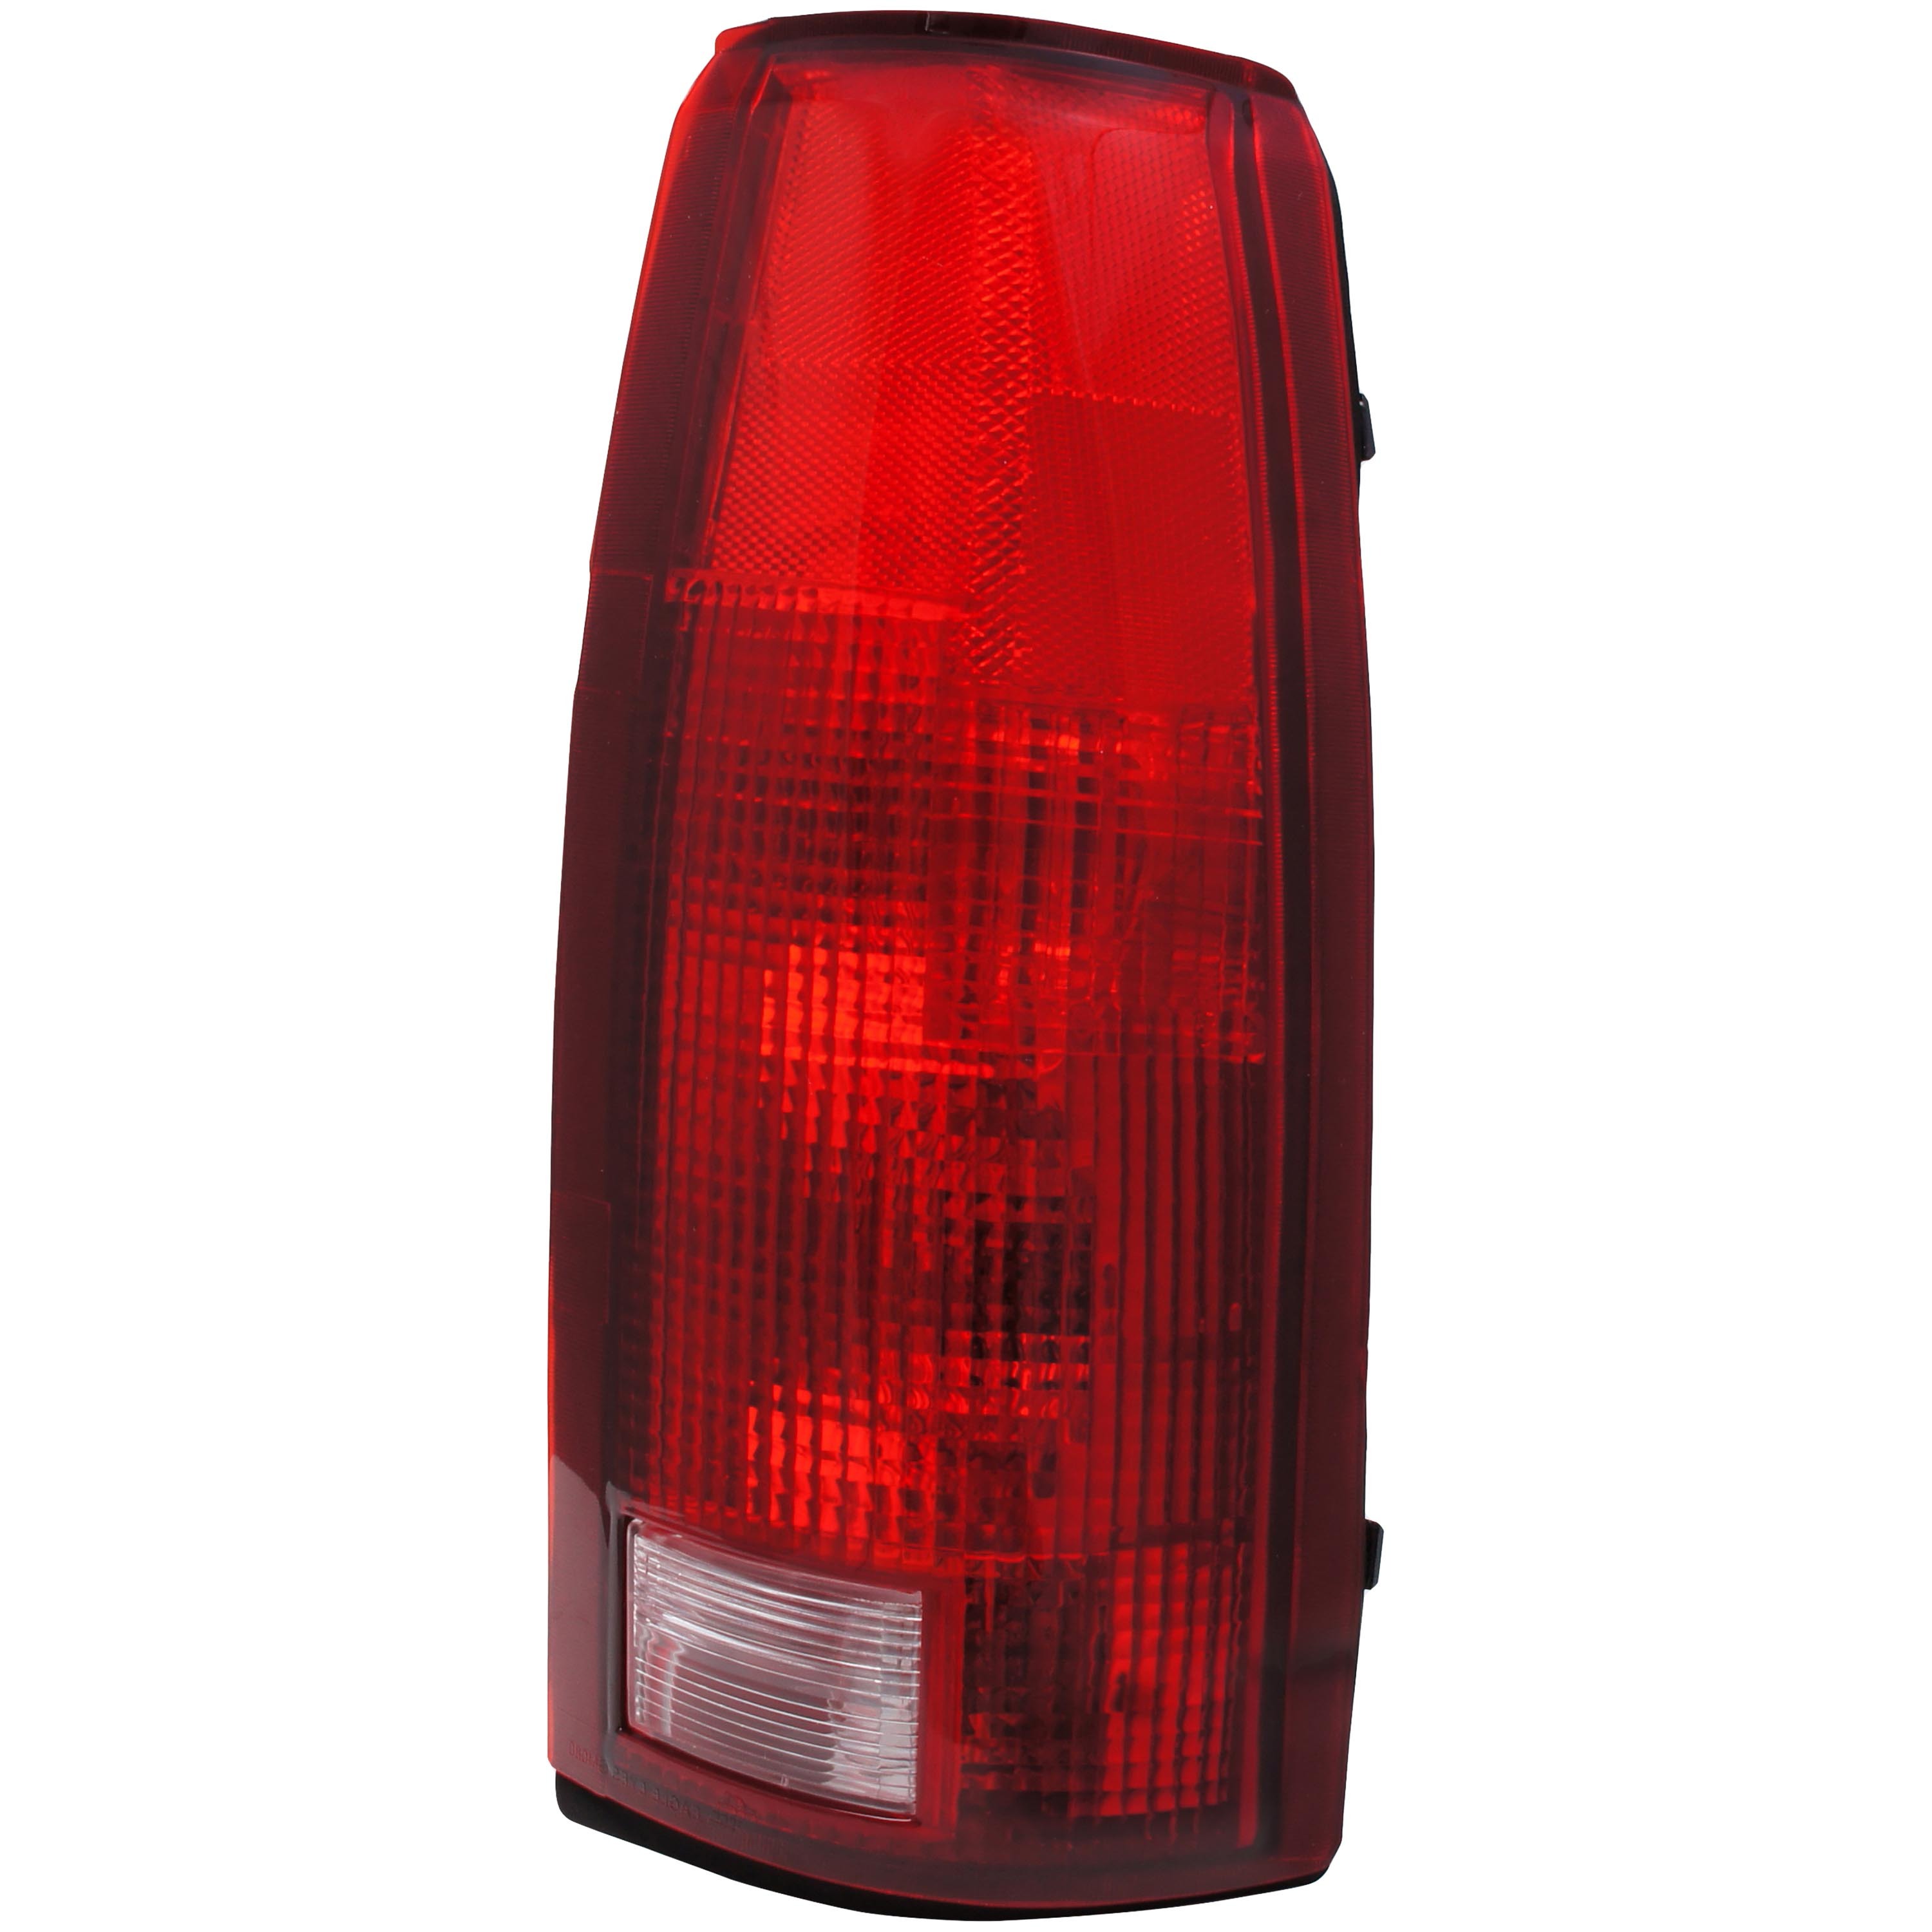 Dorman 1610049 Passenger Side Tail Light Assembly for Specific Cadillac /  Chevrolet / GMC Models Fits select: 1988-2000 CHEVROLET GMT-400, 1995-2000 